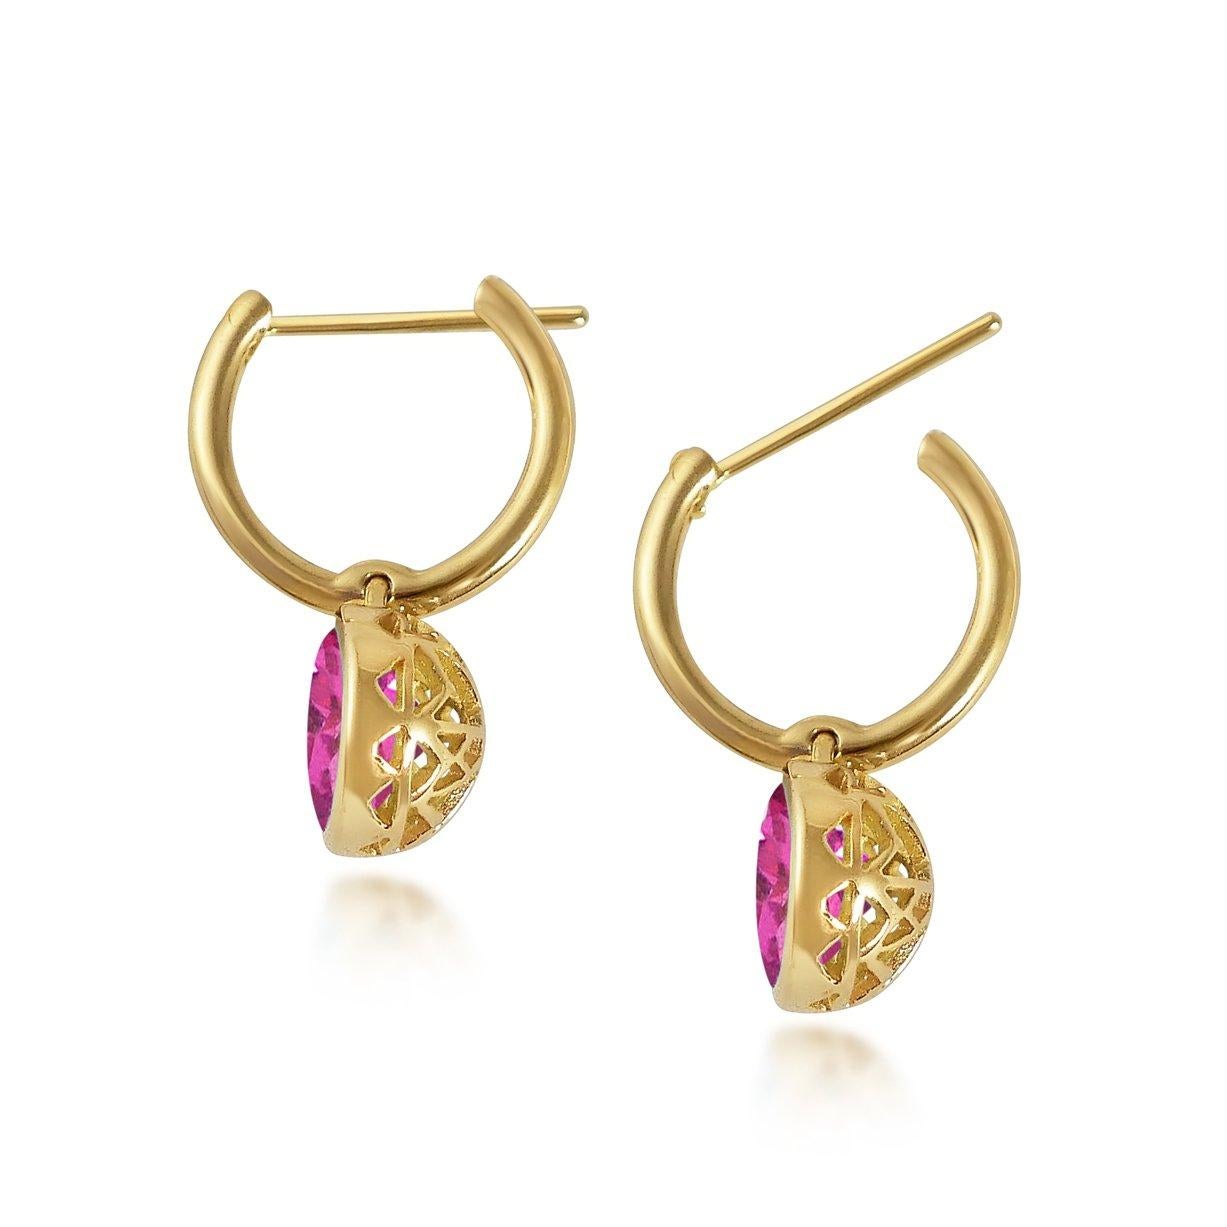 Handcrafted 2.60 Carats Pink Tourmaline 18 Karat Yellow Gold Drop Earrings. The 8mm natural stones are set in our iconic hand pierced gold lace to let the light through. Our precious and fine stones on our dangling earrings are highlighted by a